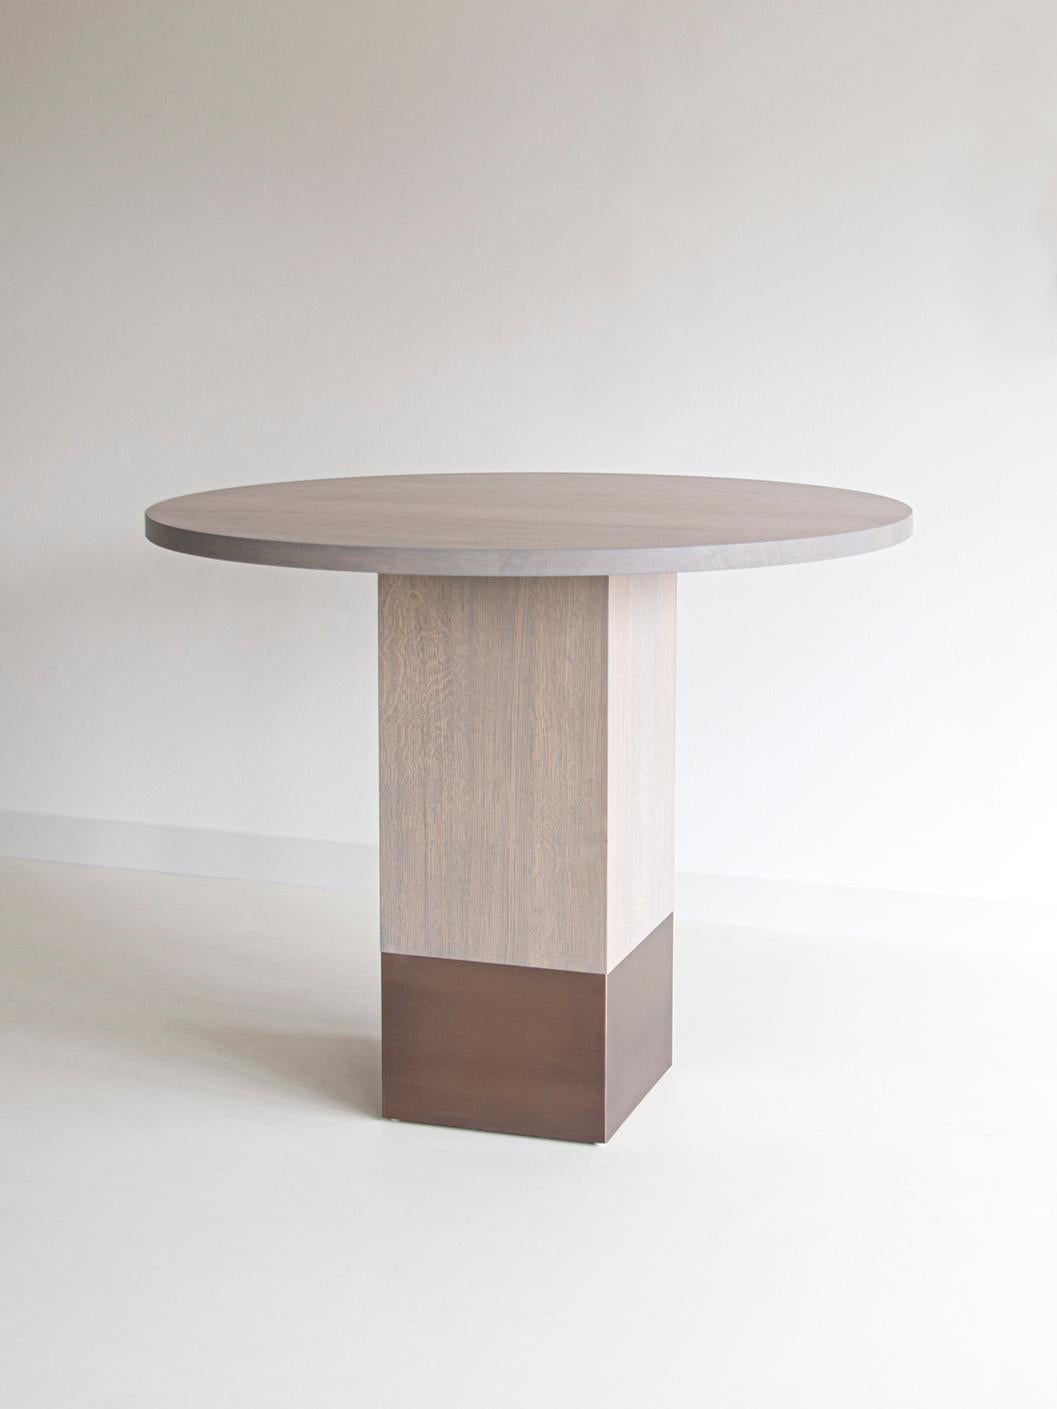 Nota Bene bar table by Van Rossum
Dimensions: D140 x 140 x H110 cm
Materials: Oak, brass.

The wood is available in all standard Van Rossum colors, or in a matching finish to customer’s own sample.
Detailing is available in stainless steel or